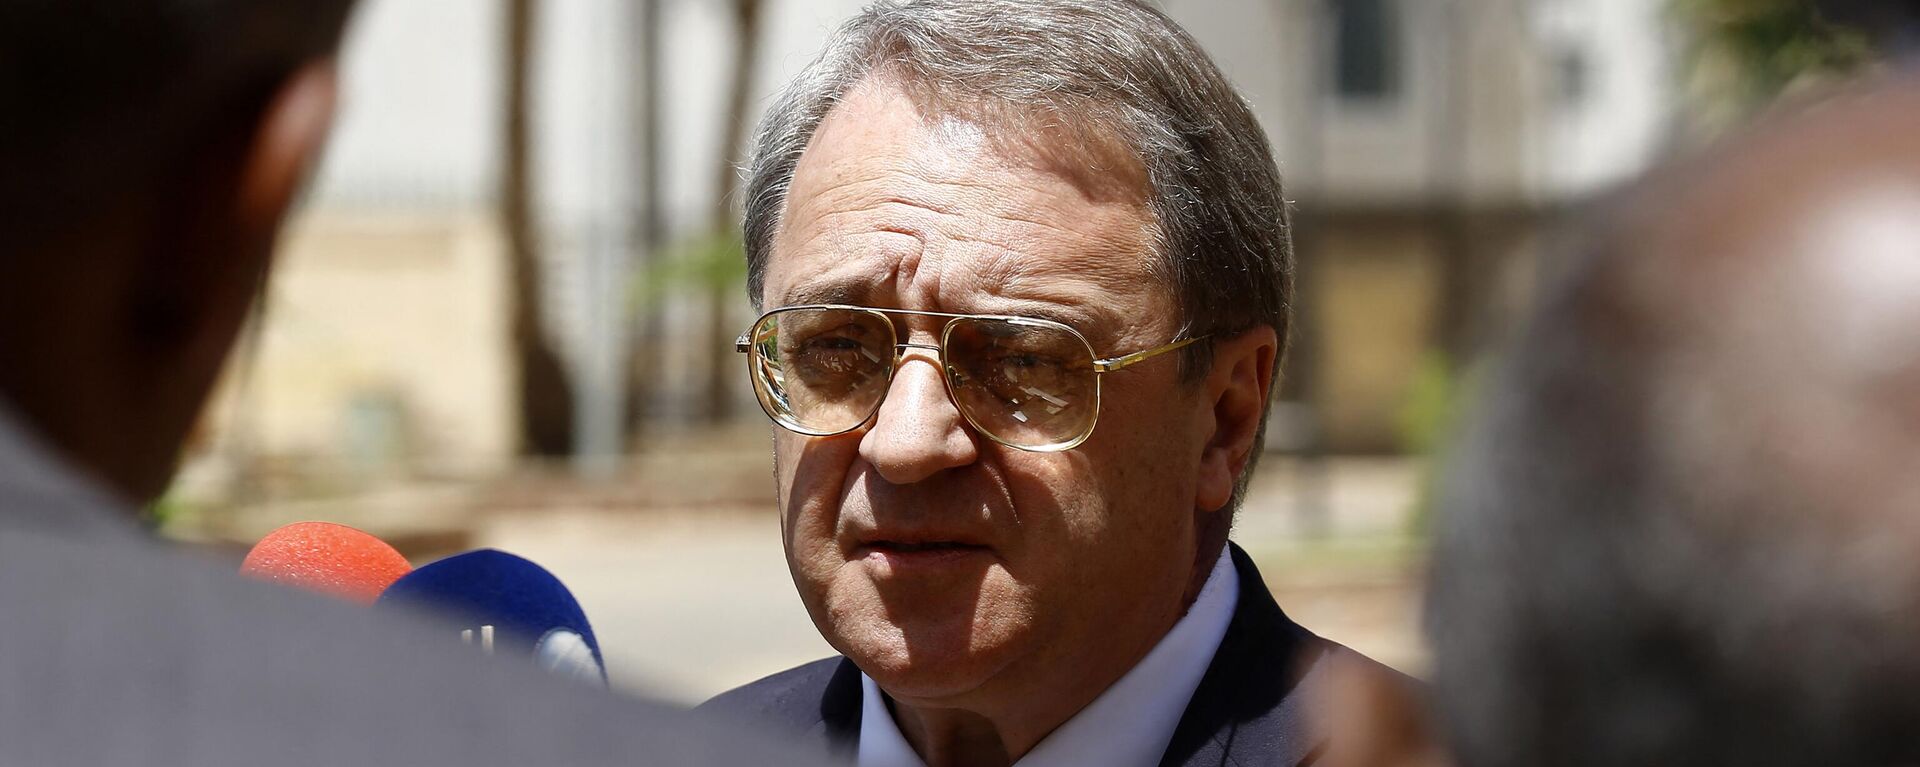 Russian Deputy Foreign Minister Mikhail Bogdanov speaks to the press following his meeting with the Sudanese president in the capital Khartoum on March 16, 2019. - Sputnik International, 1920, 13.12.2022